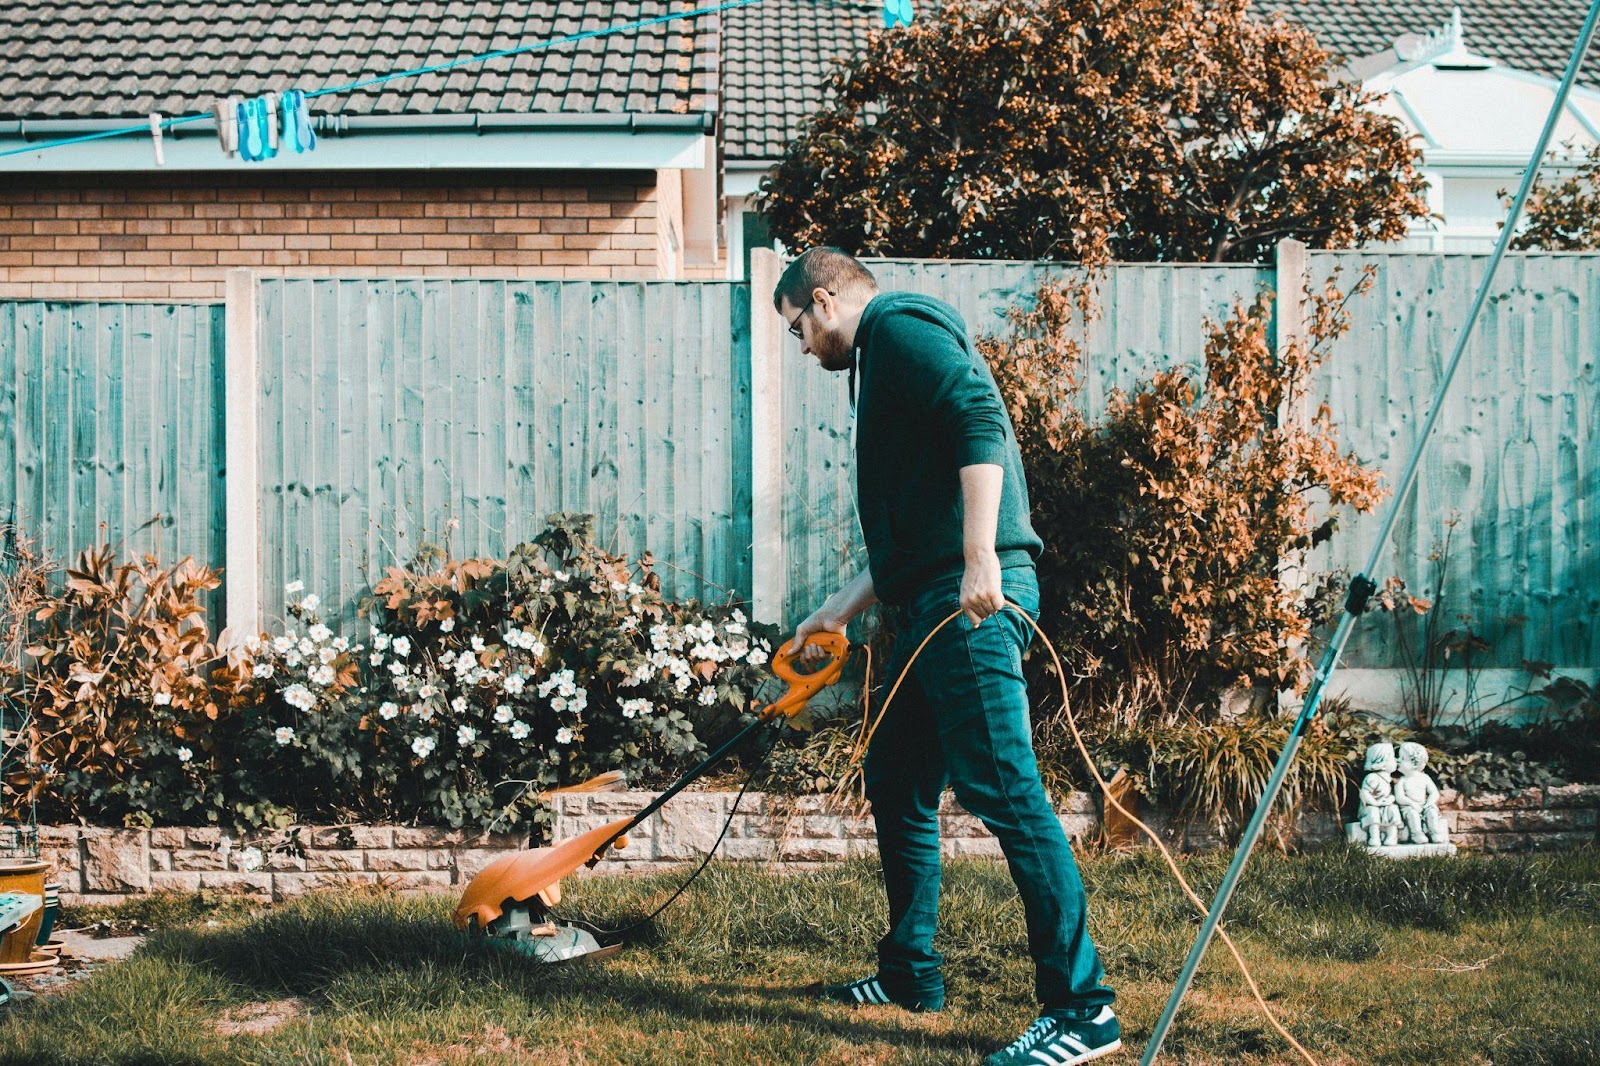 Best Lawn Care Services and Company for Lawn Maintenance in Surrey